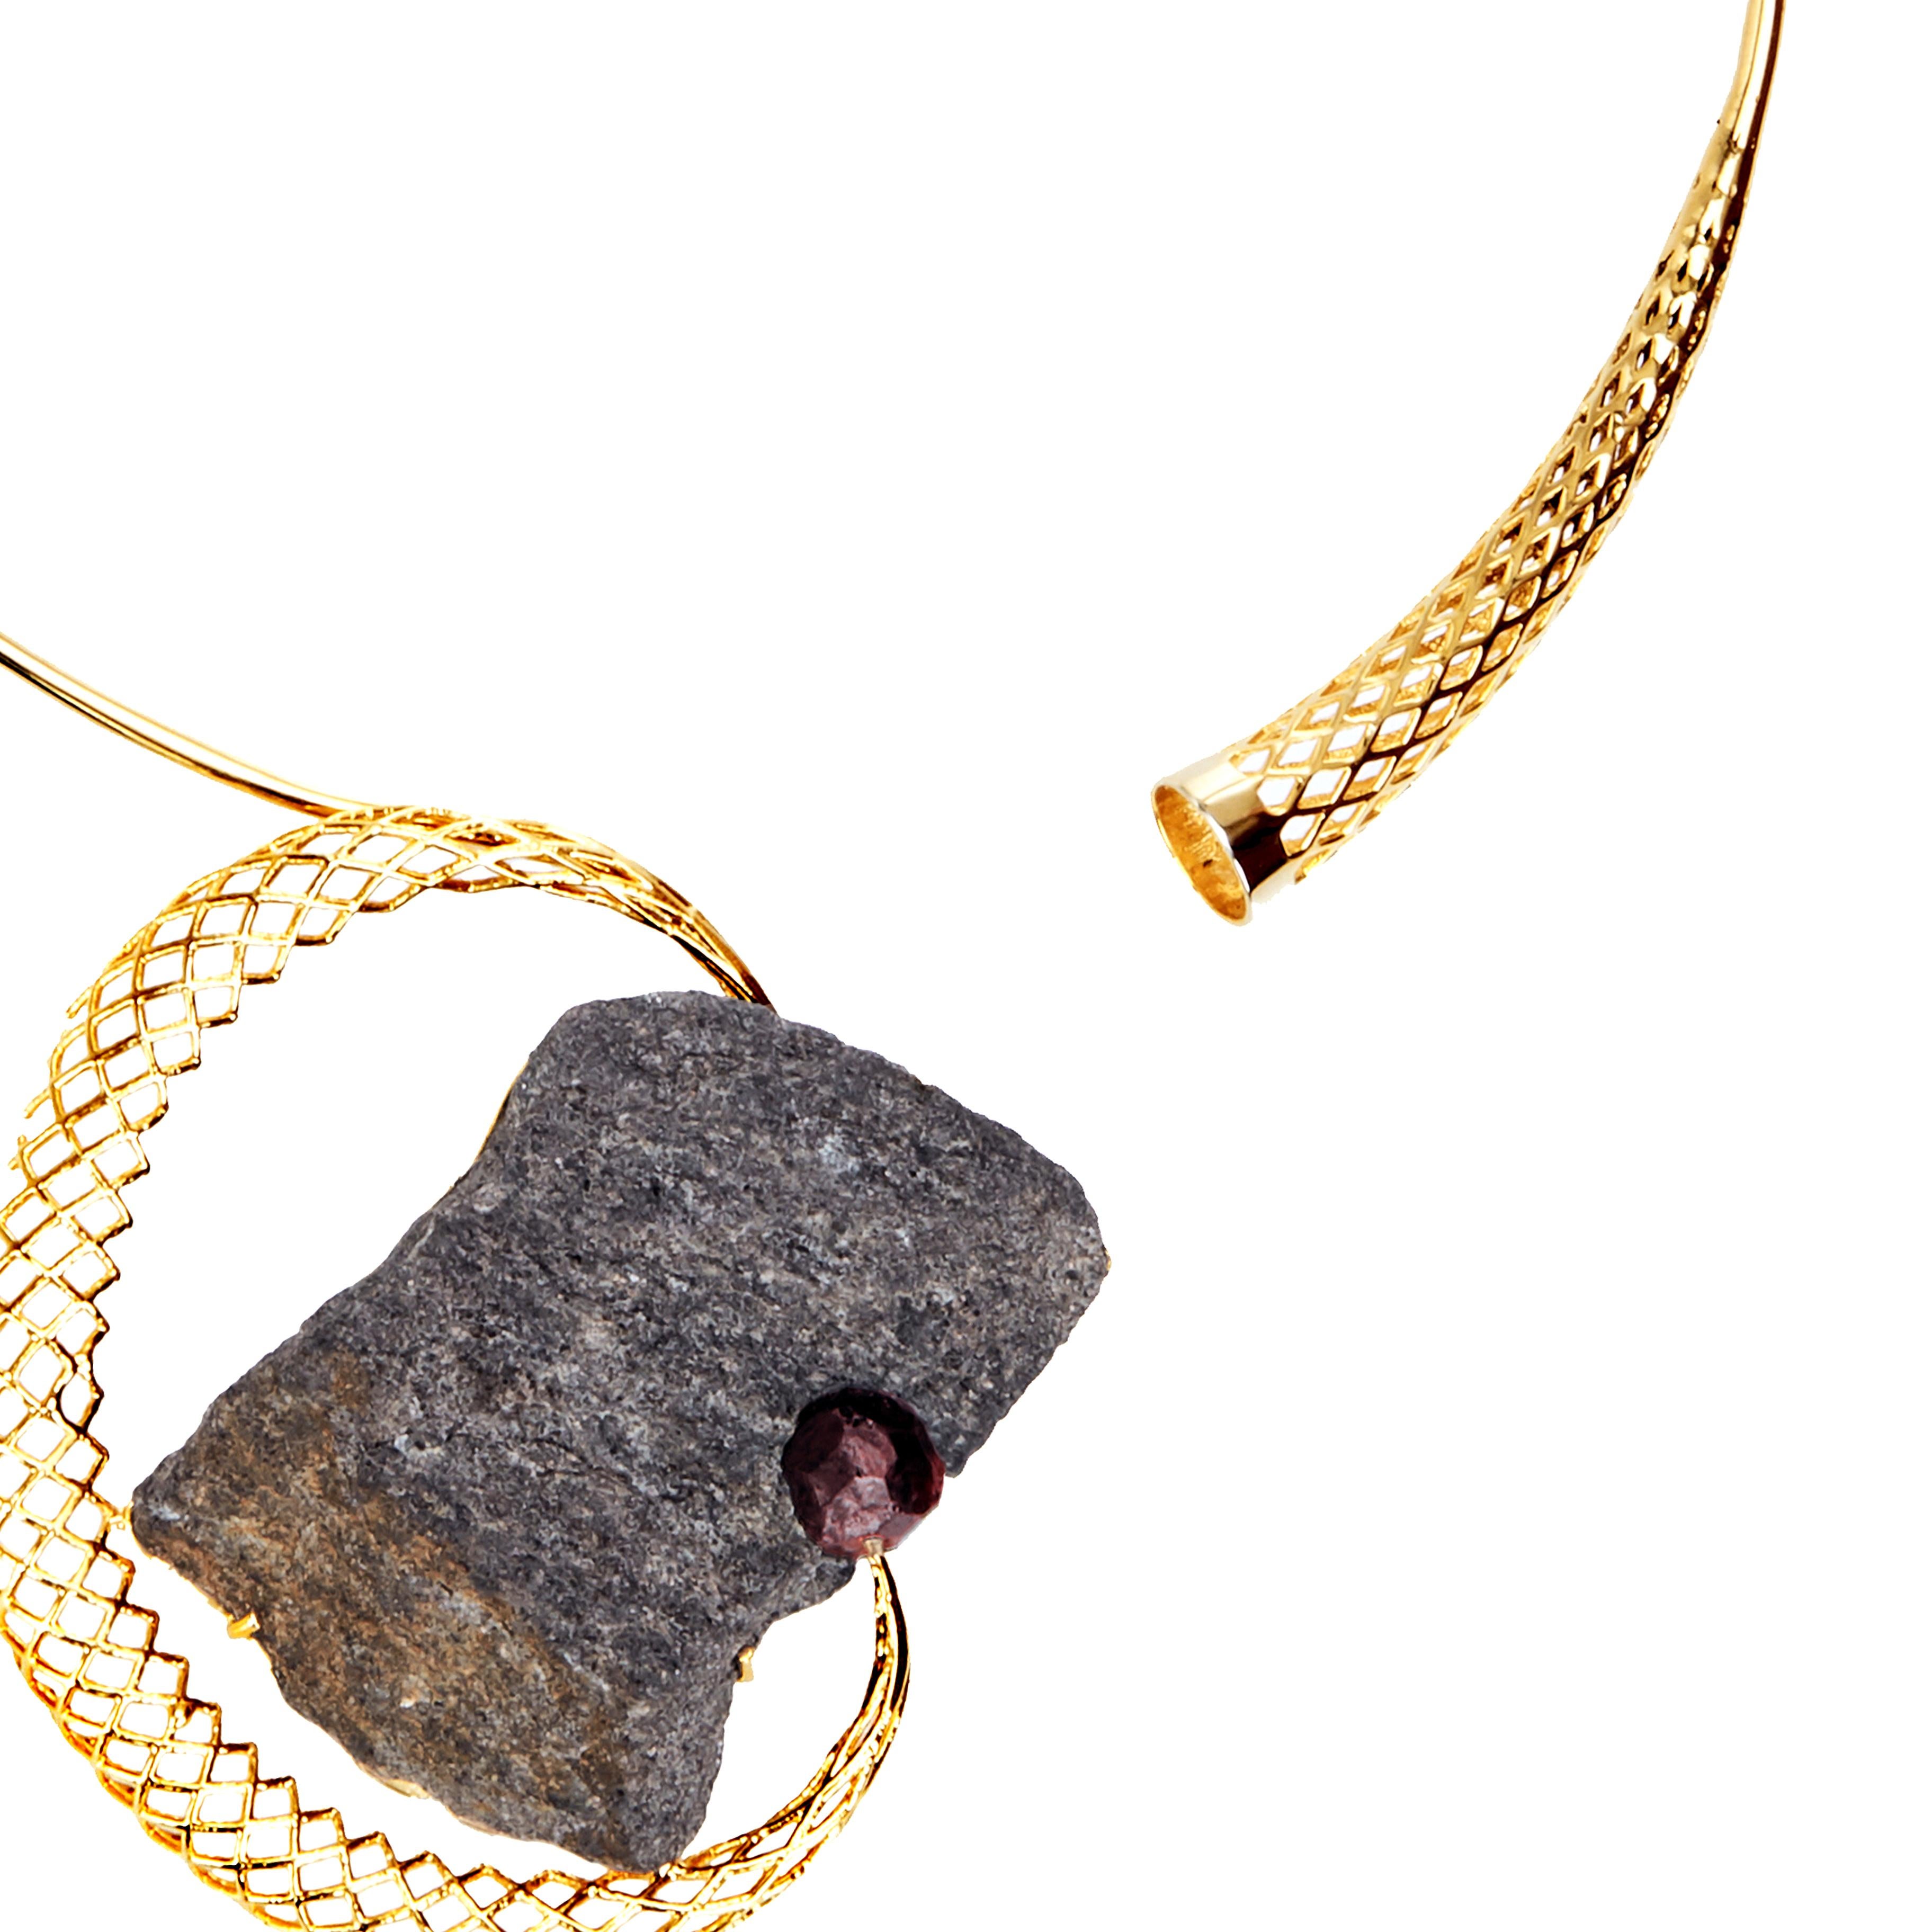 Yemyungji Mineral Collection Almandite Garnet 18K Gold Great Impact Necklace

For her latest Mineral collection, she took components created with the meshwork and mixed them with a series of gemstones and minerals, some in natural rough form, to